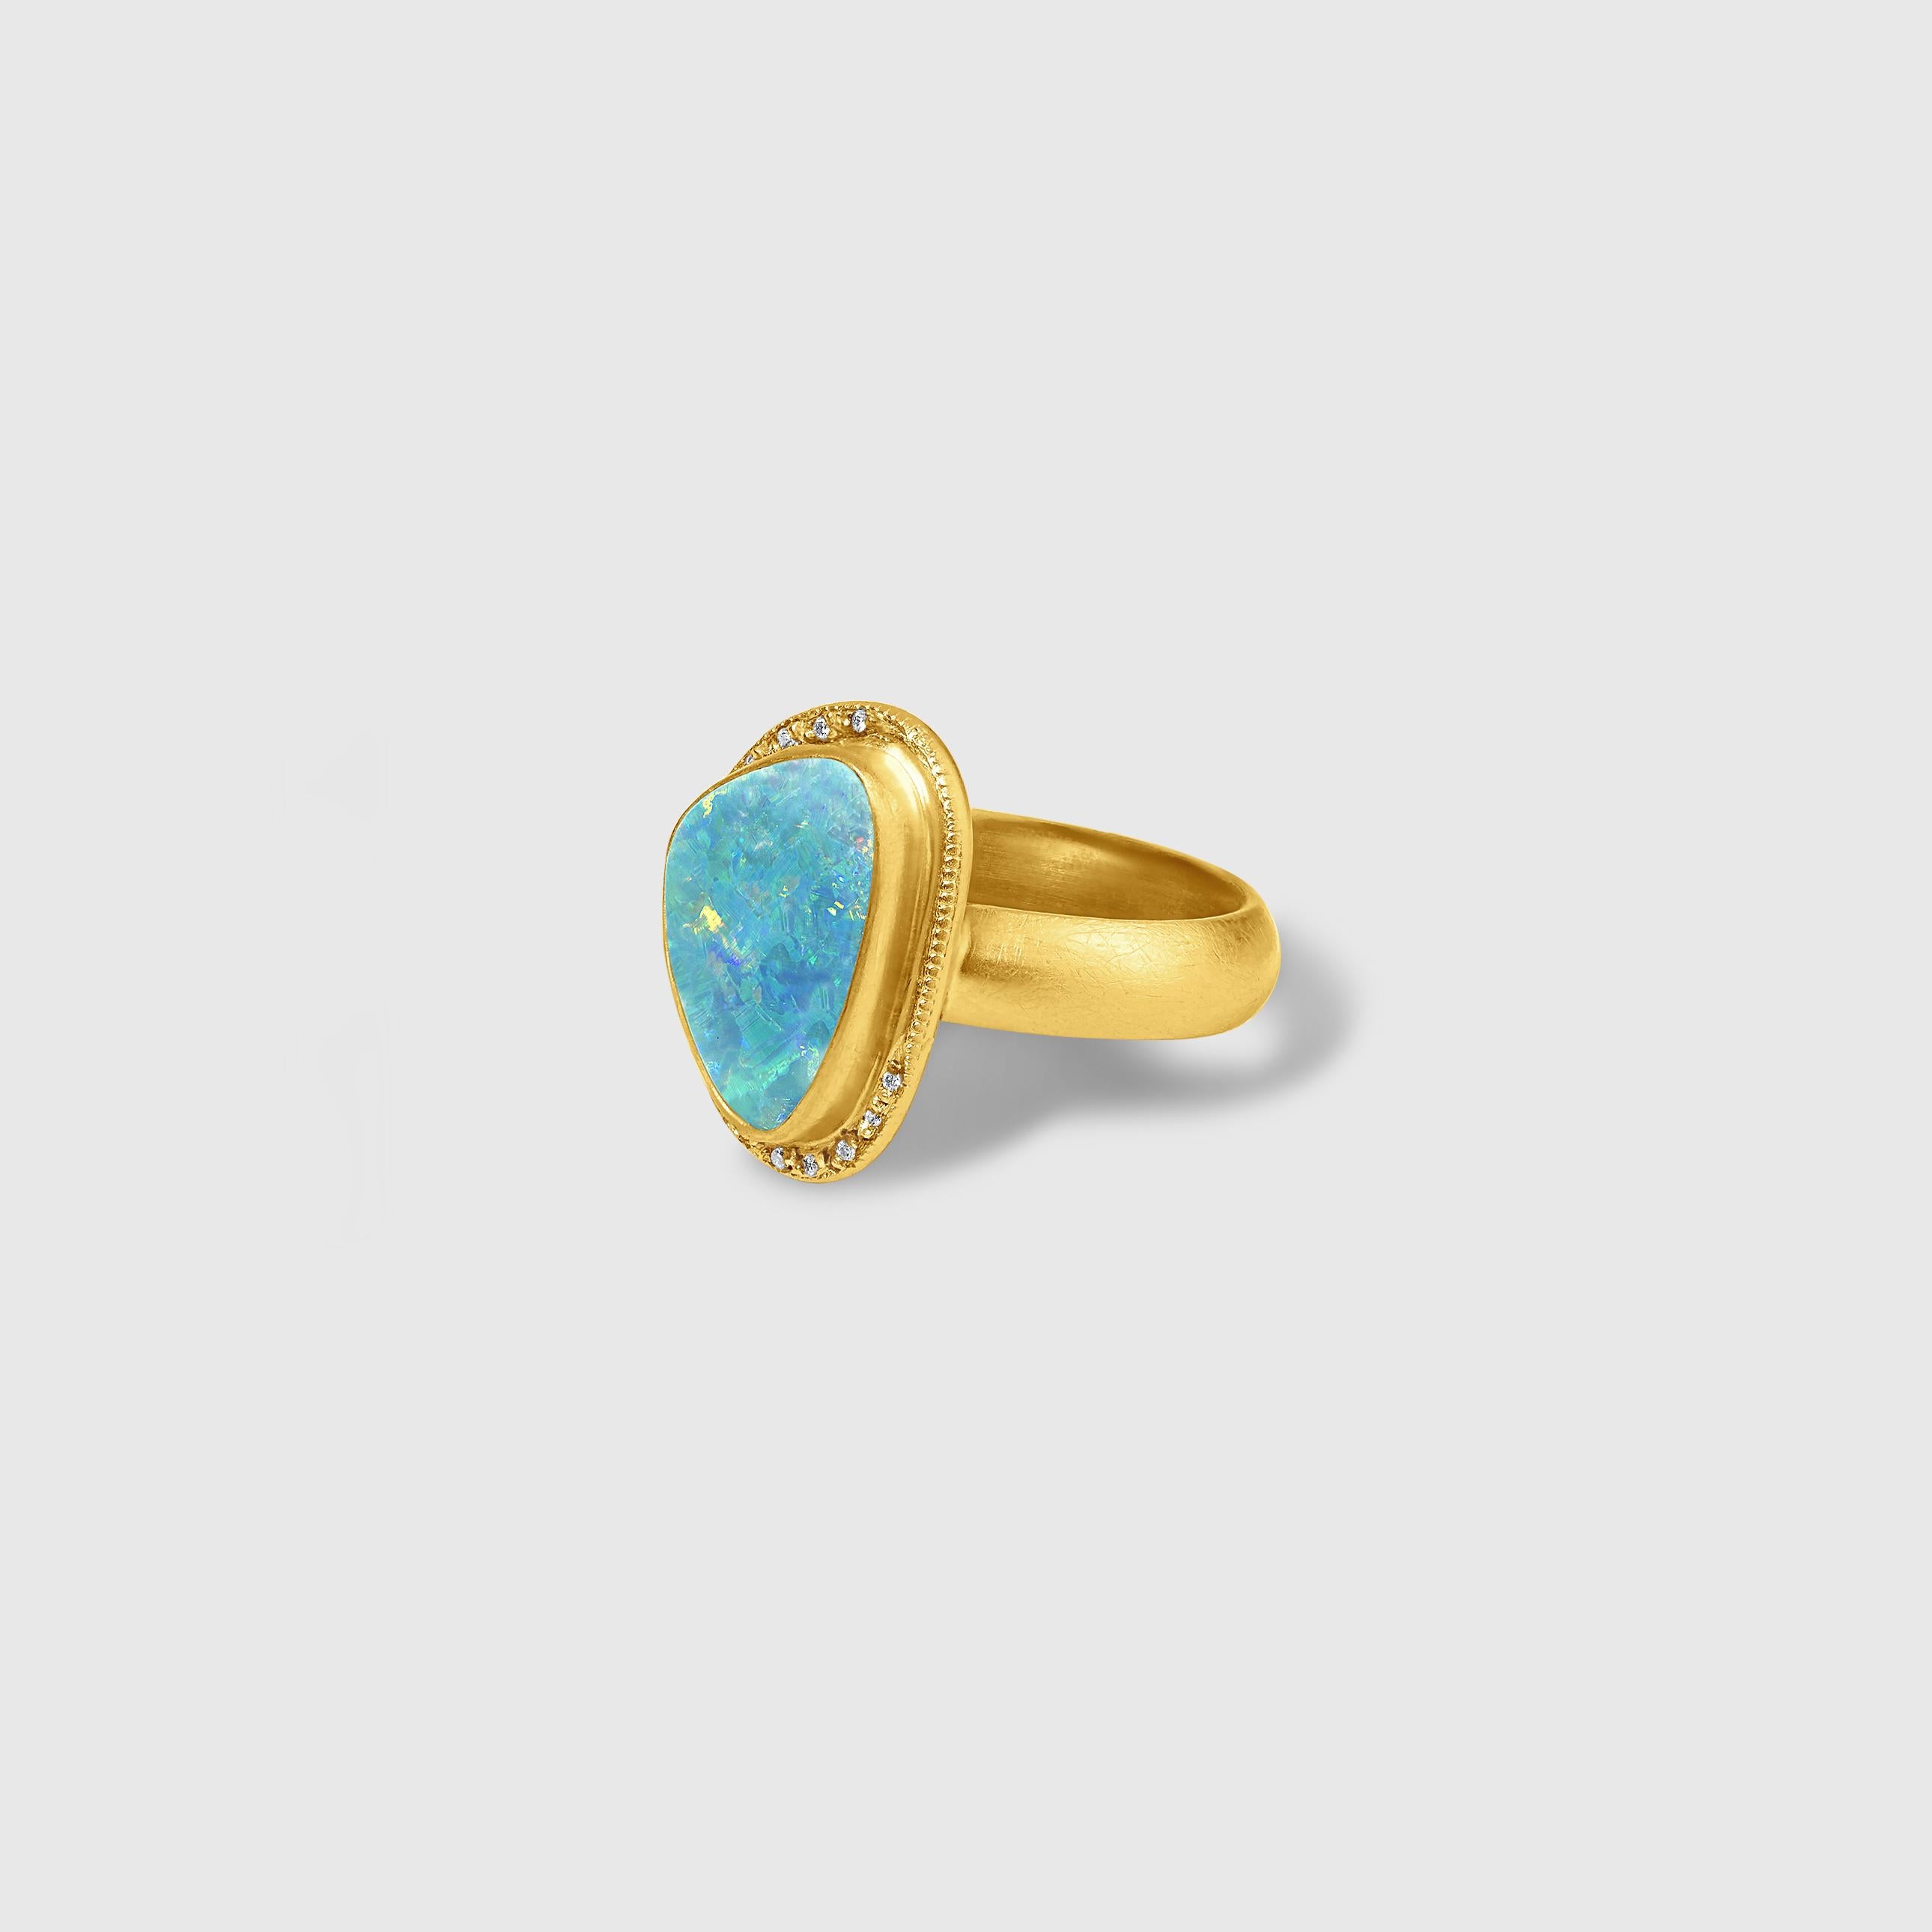 Byzantine Hanedan Ring with 2.5ct Opal & Diamonds 24 Kt Yellow Gold & Silver by Kurtulan For Sale